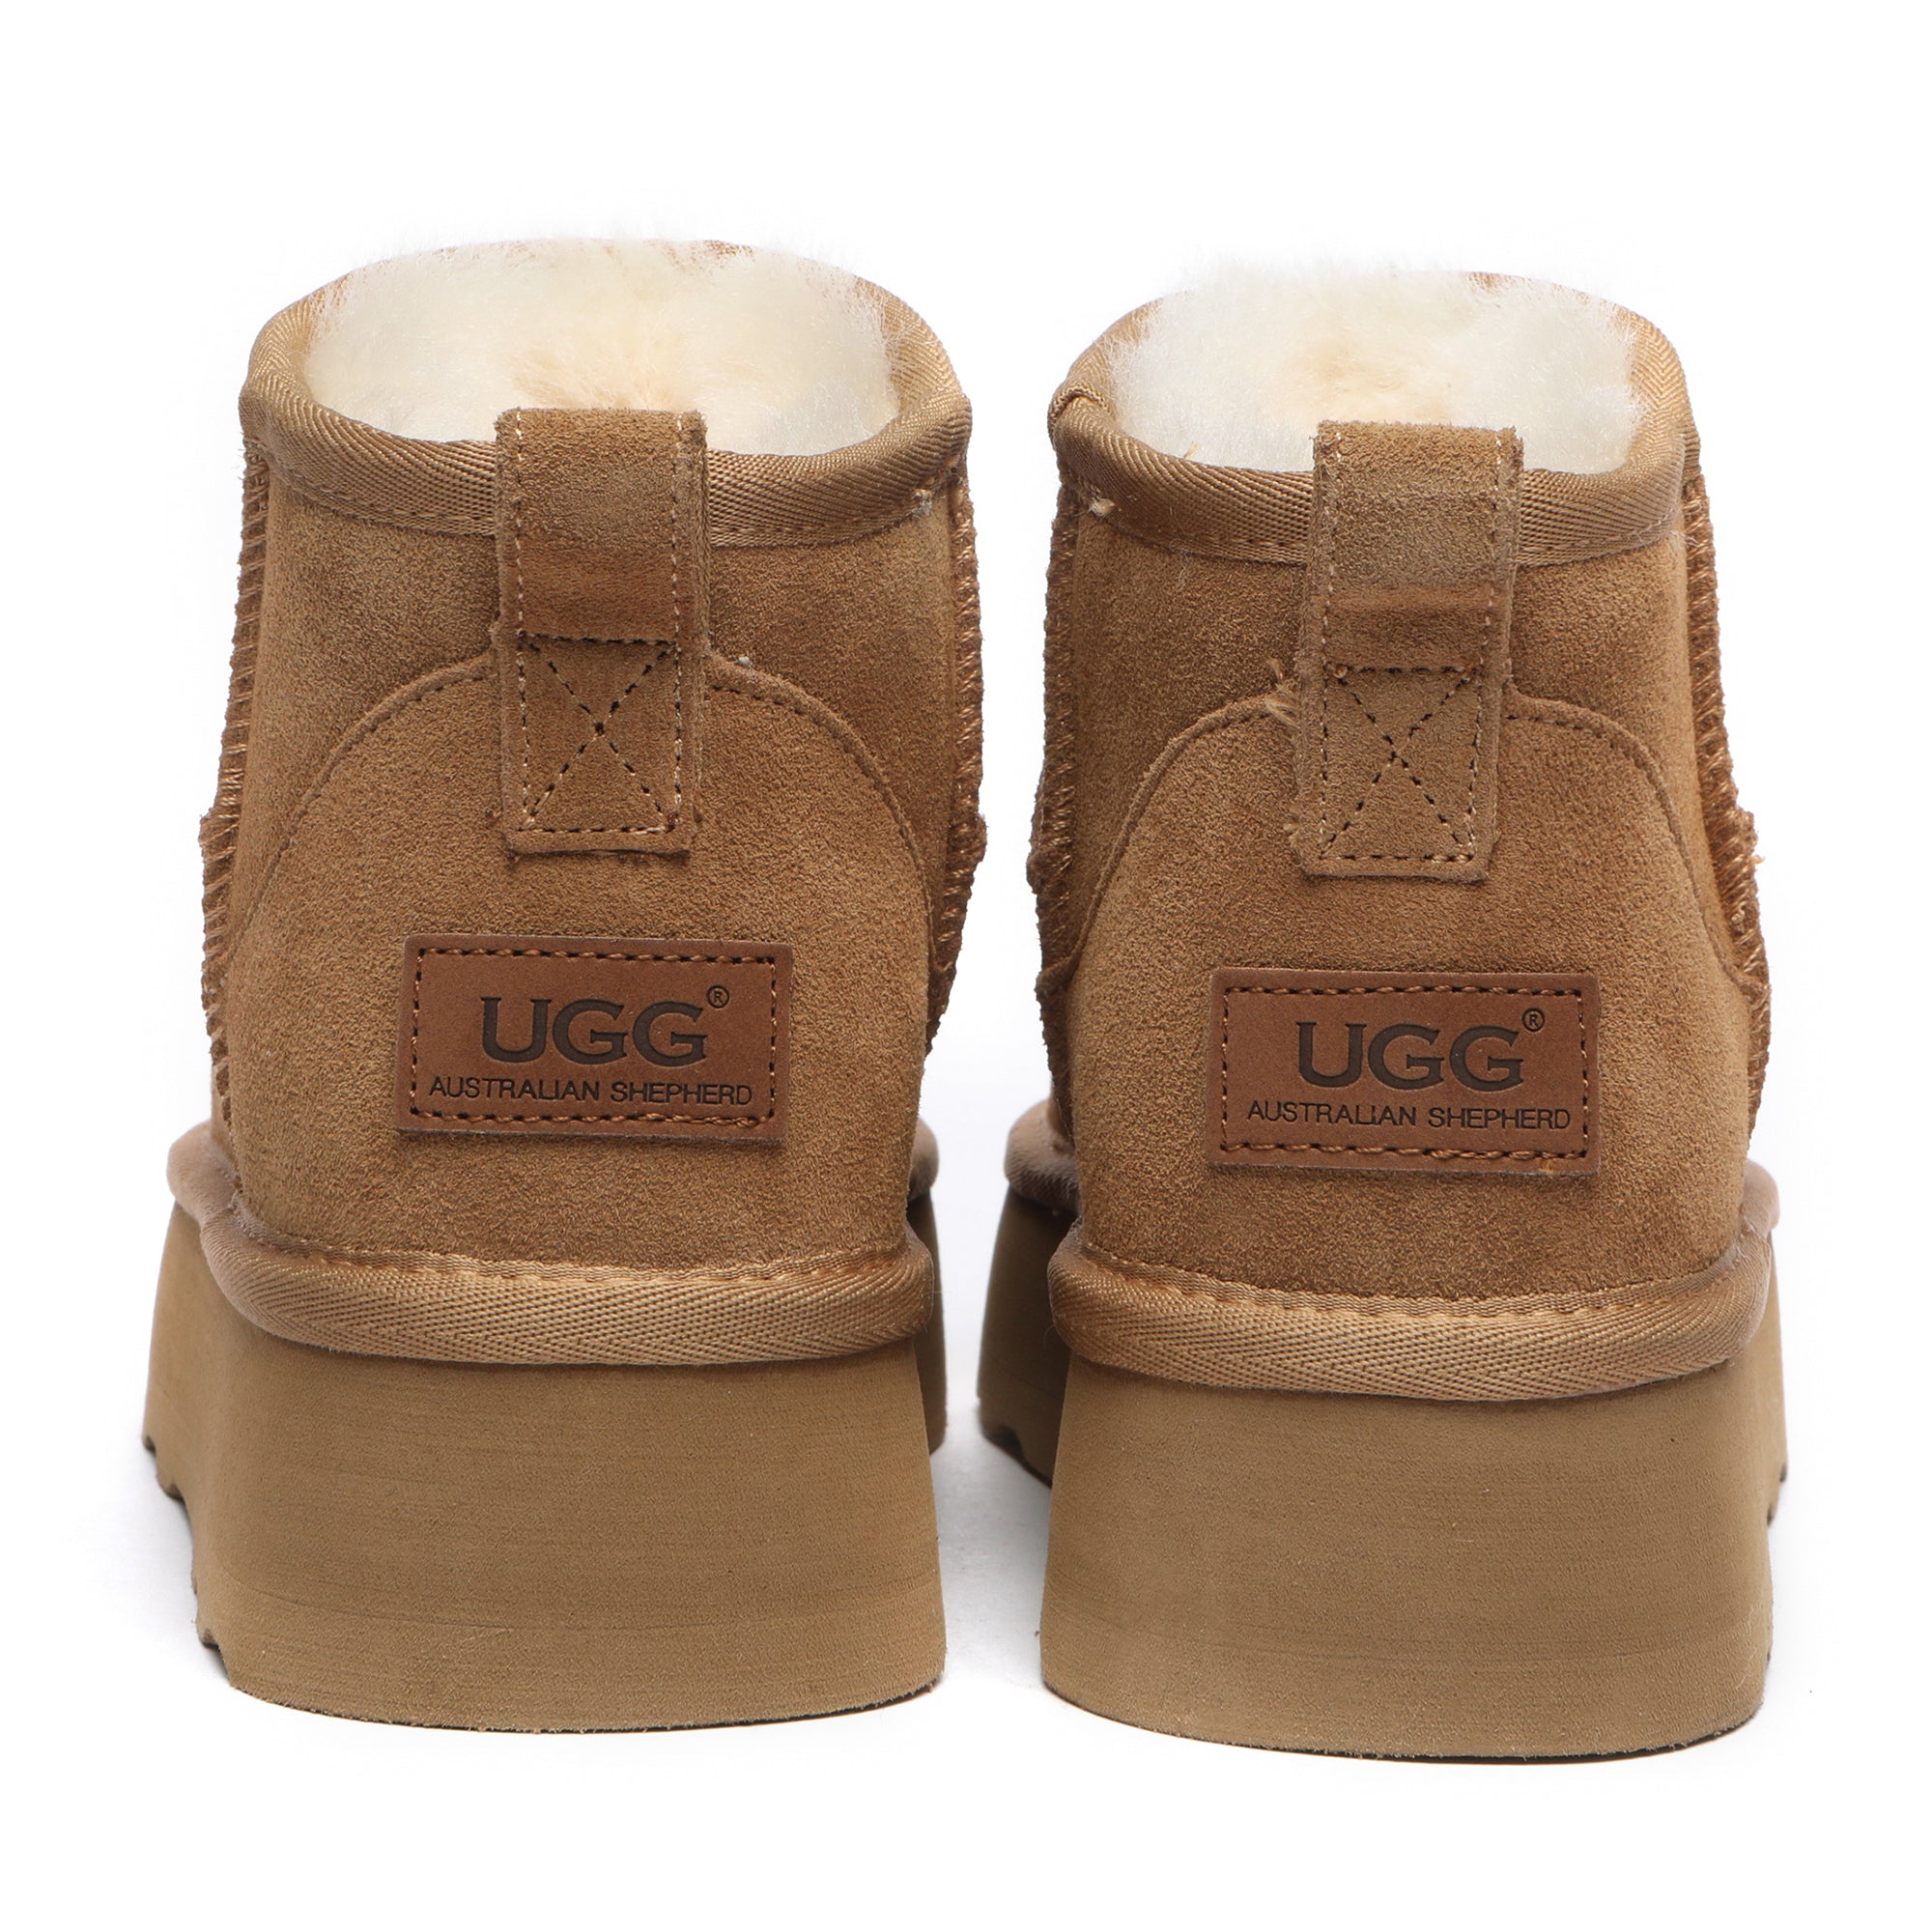 UGG Boots, Shoes and Sandals Online, Top UGG Store